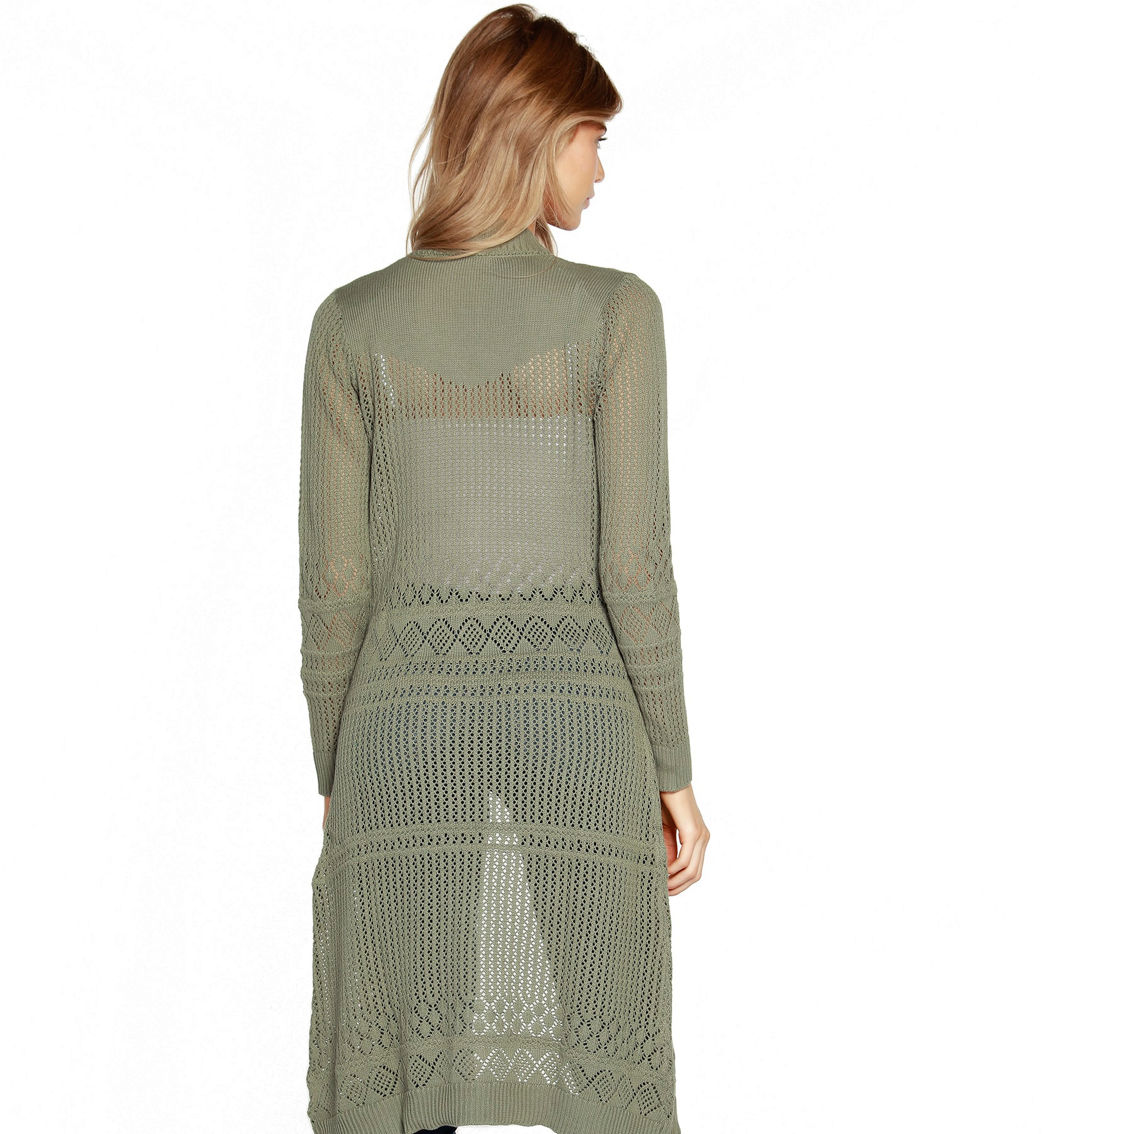 Belldini Pointelle-Stitch Duster Cardigan - Image 2 of 4